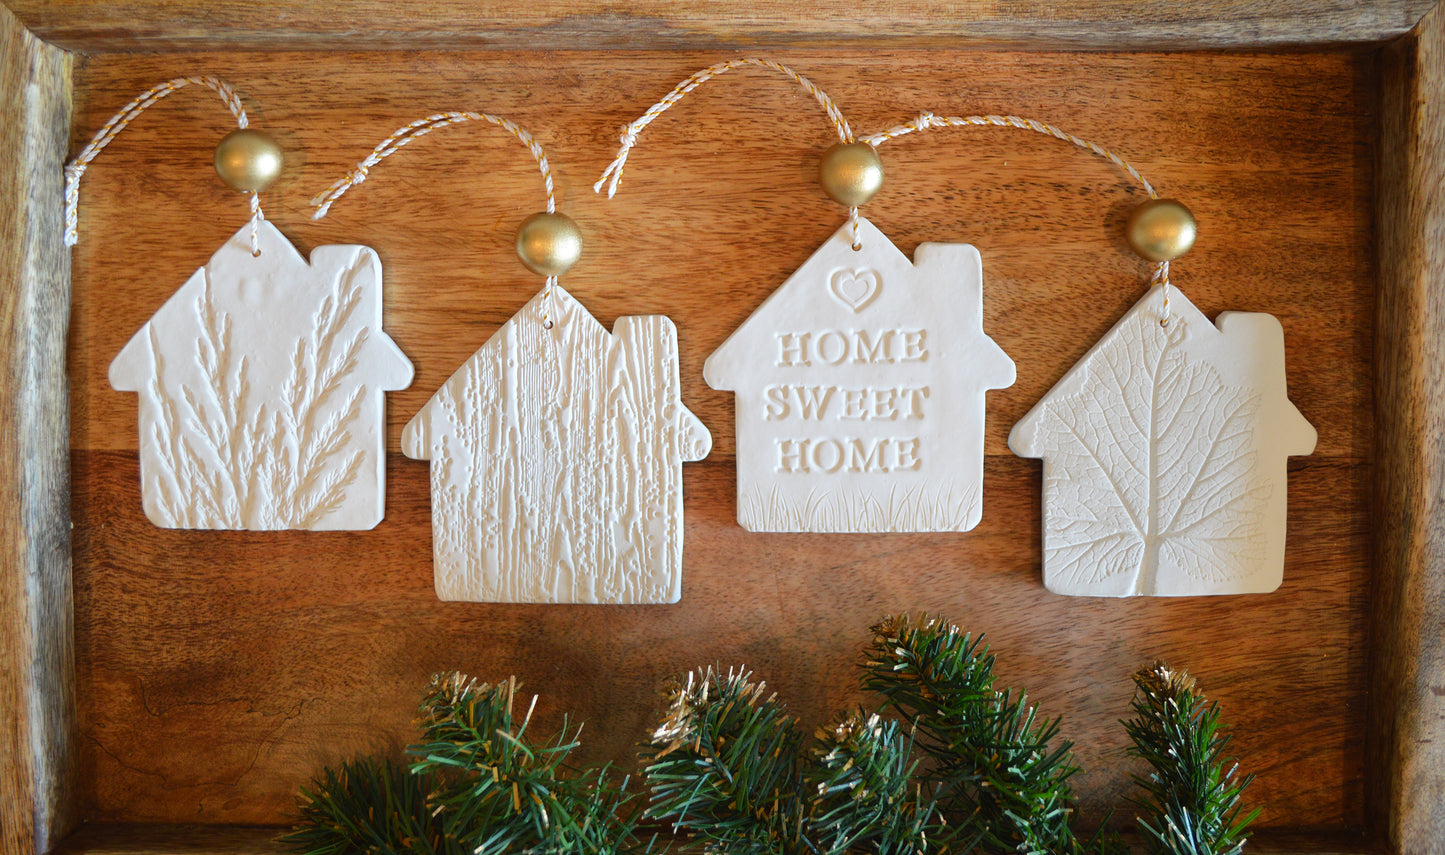 4 pure white house shaped ornaments